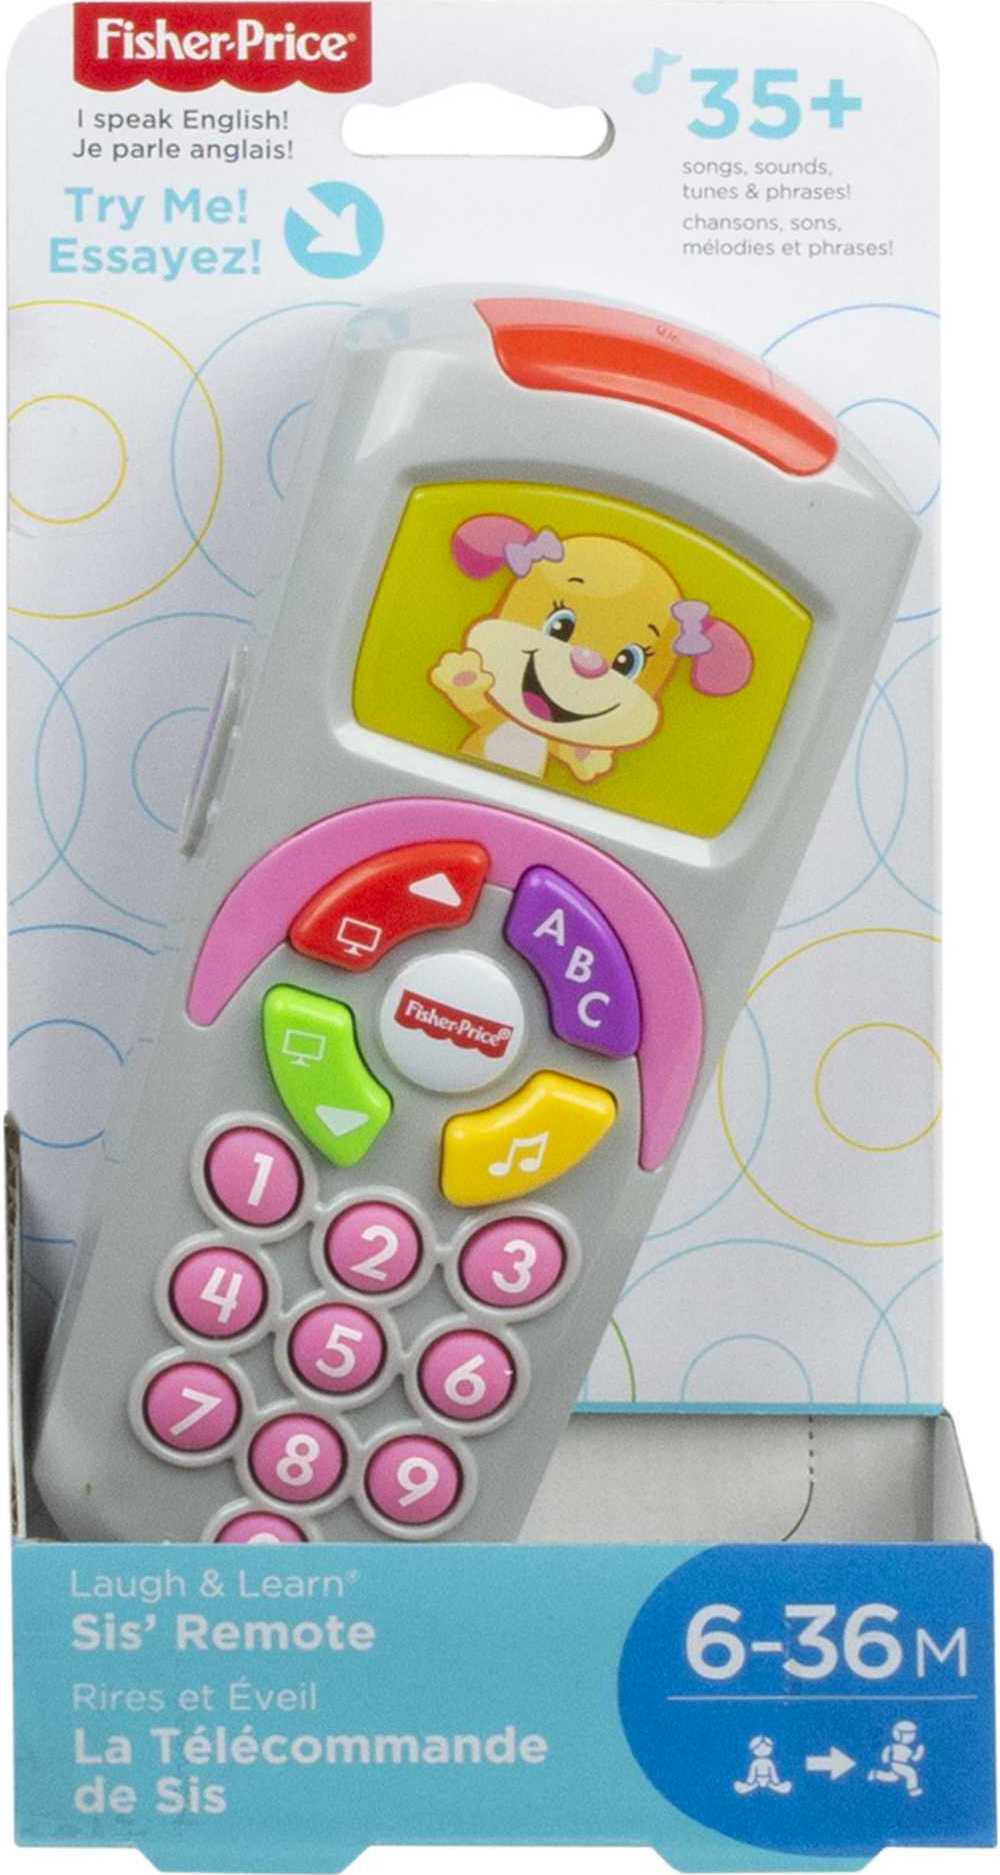 Fisher-Price Laugh & Learn Sis’s Remote Baby & Toddler Learning Toy with Music & Lights - image 7 of 7